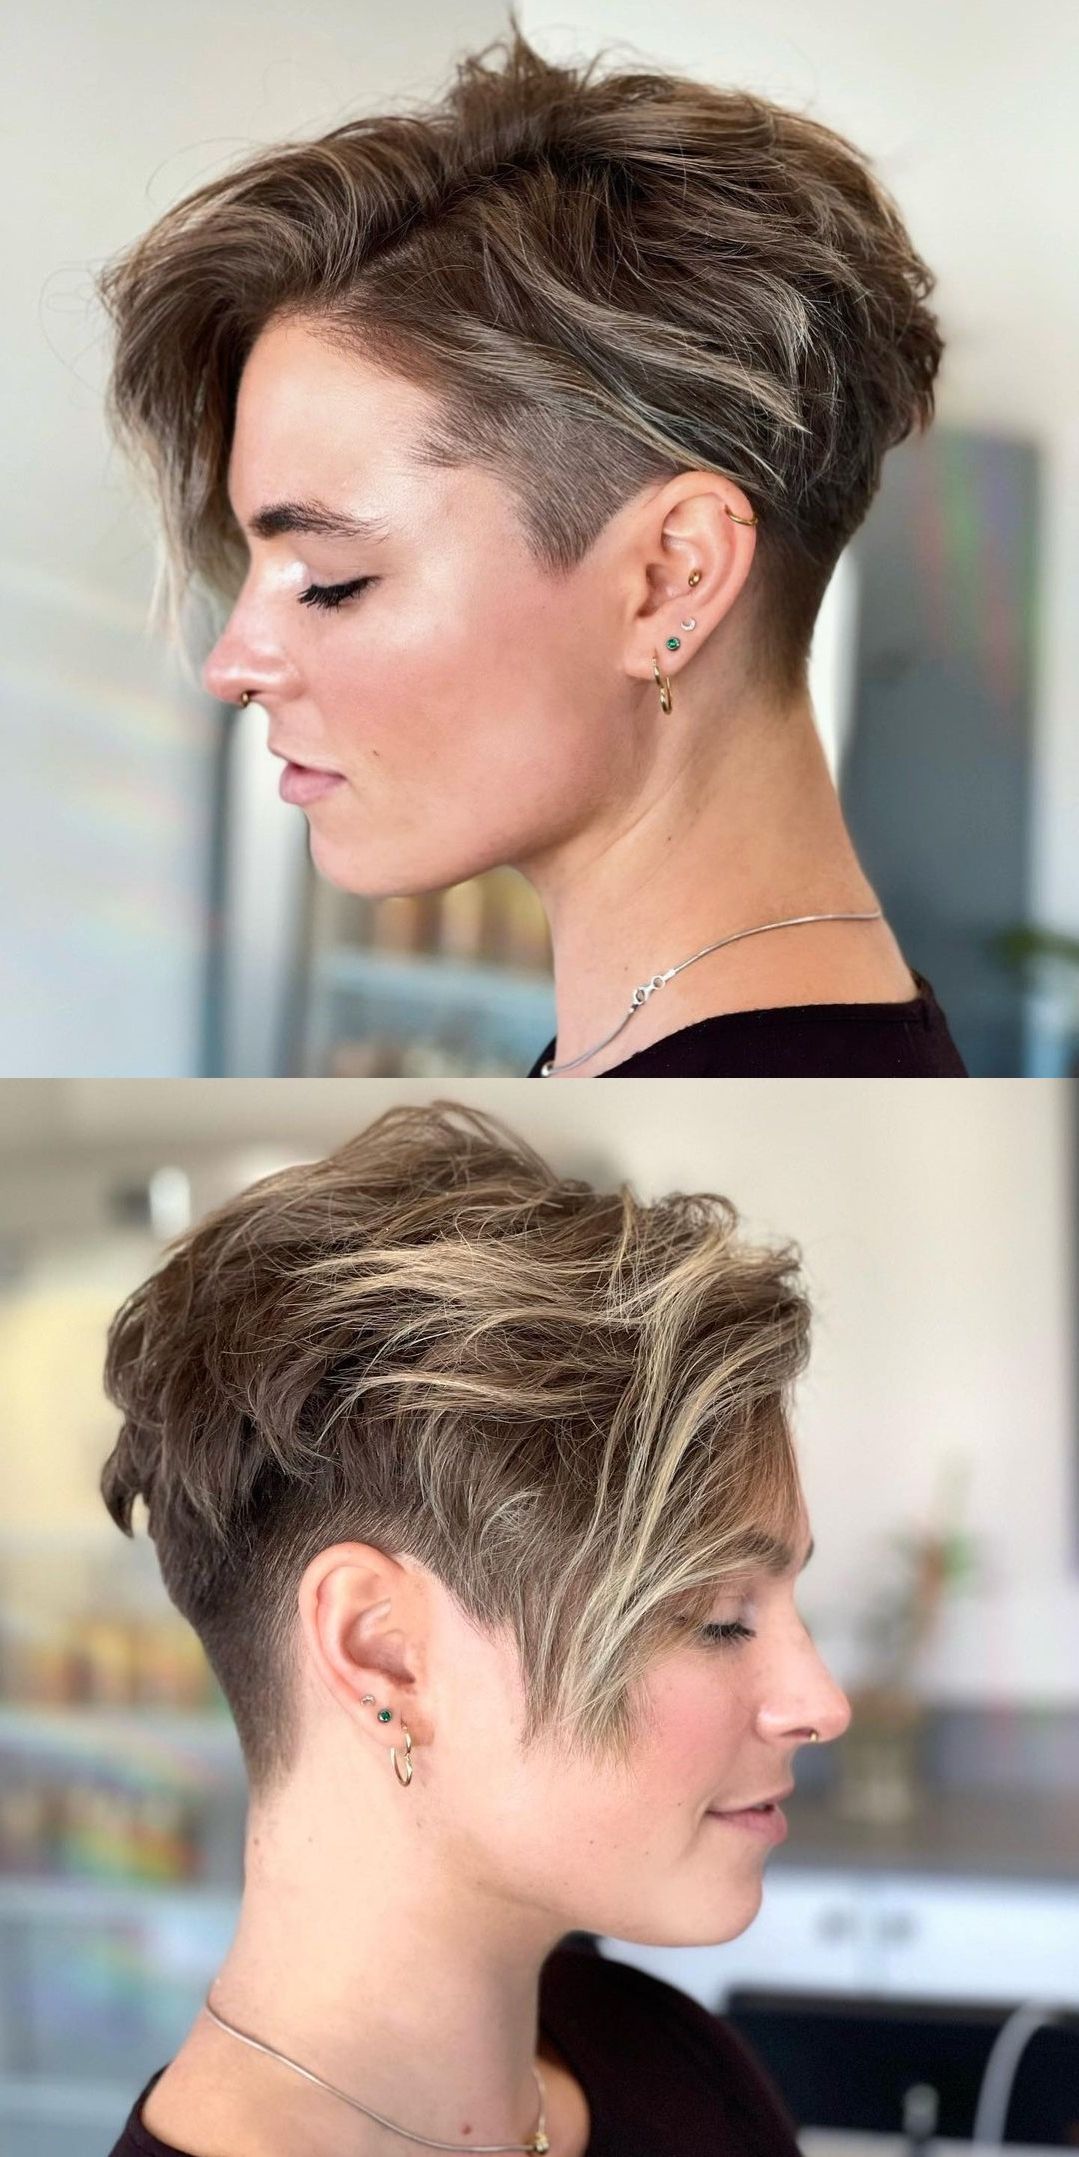 The 39 Coolest Undercut Pixie Cuts Found For 2022 With Side Parted Pixie Hairstyles With An Undercut (View 10 of 20)